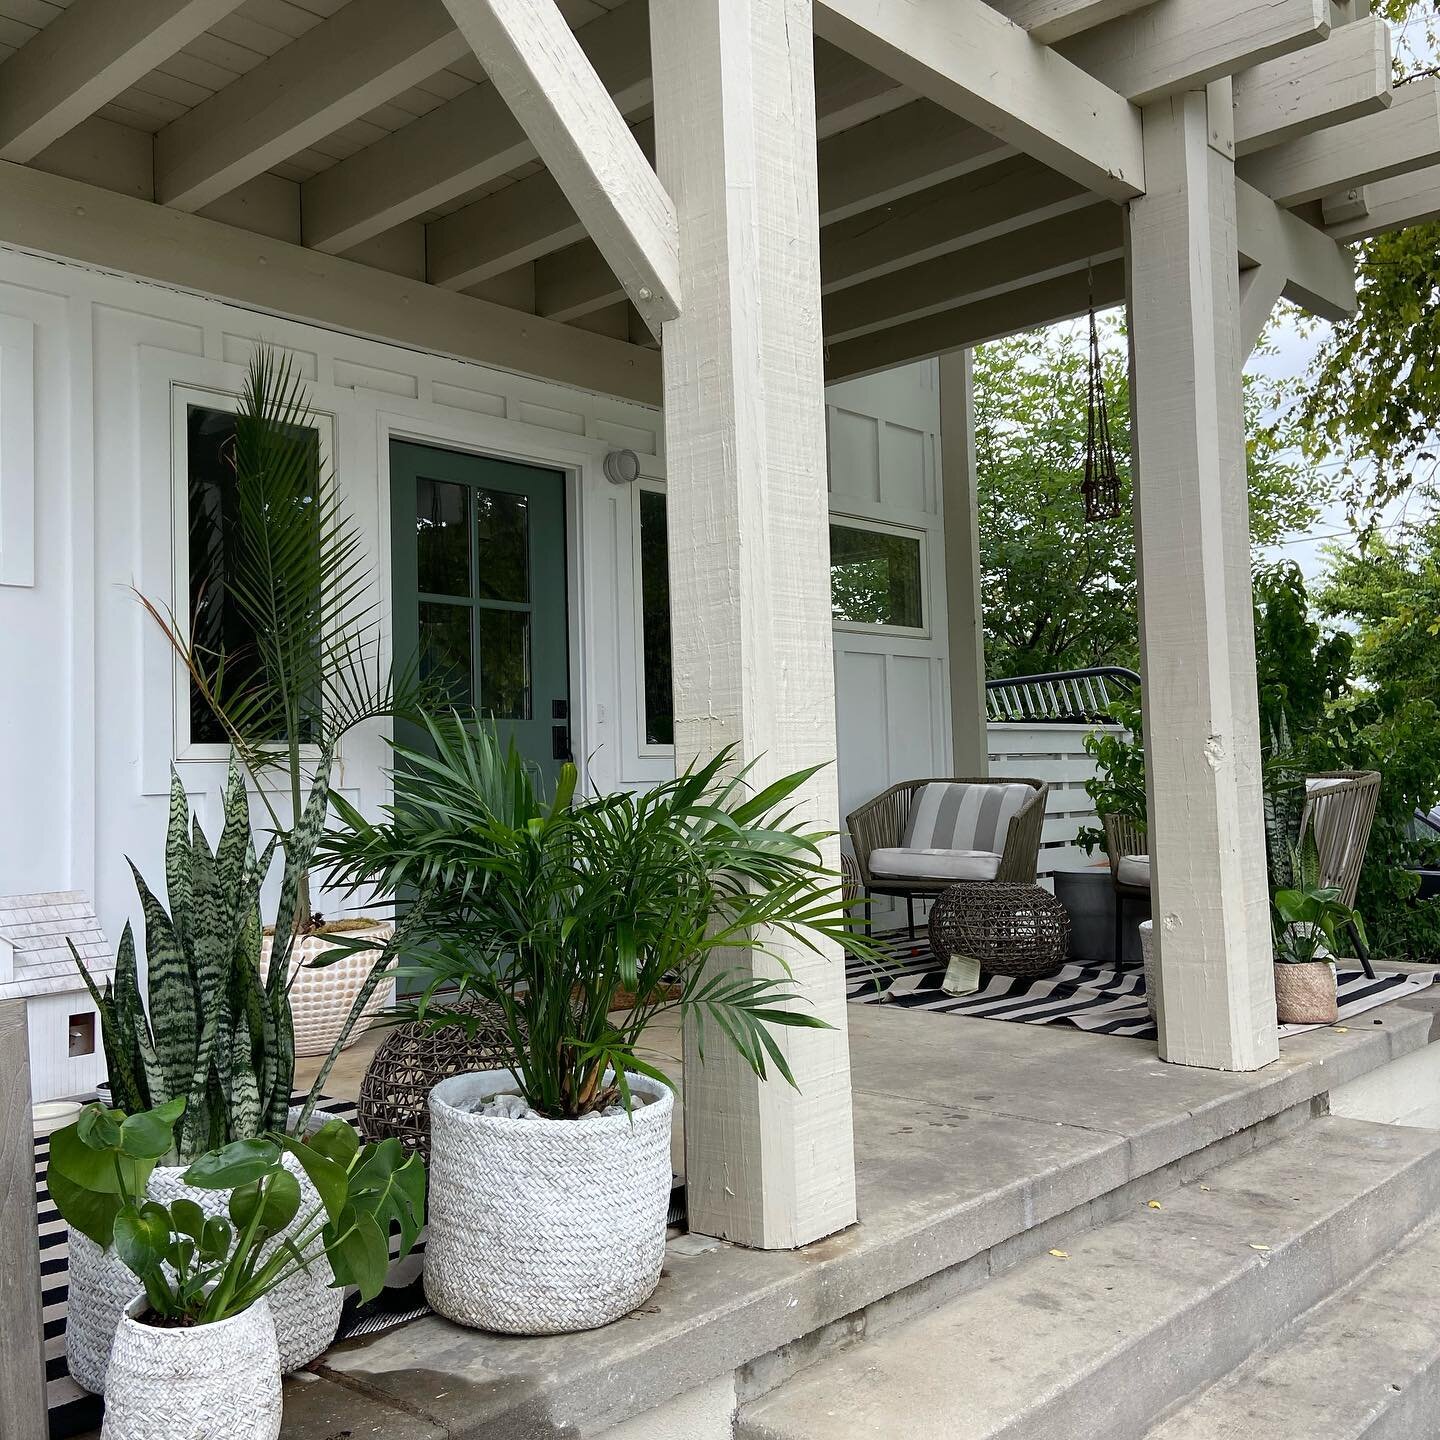 Checking on a favorite tropical vibe front porch. 🌿🌿🌿
Did you know we make house calls?  We fertilize, prune, offer pest and disease management with organic products and offer reporting for your plants.  Let us help you and your plants!
#plantserv